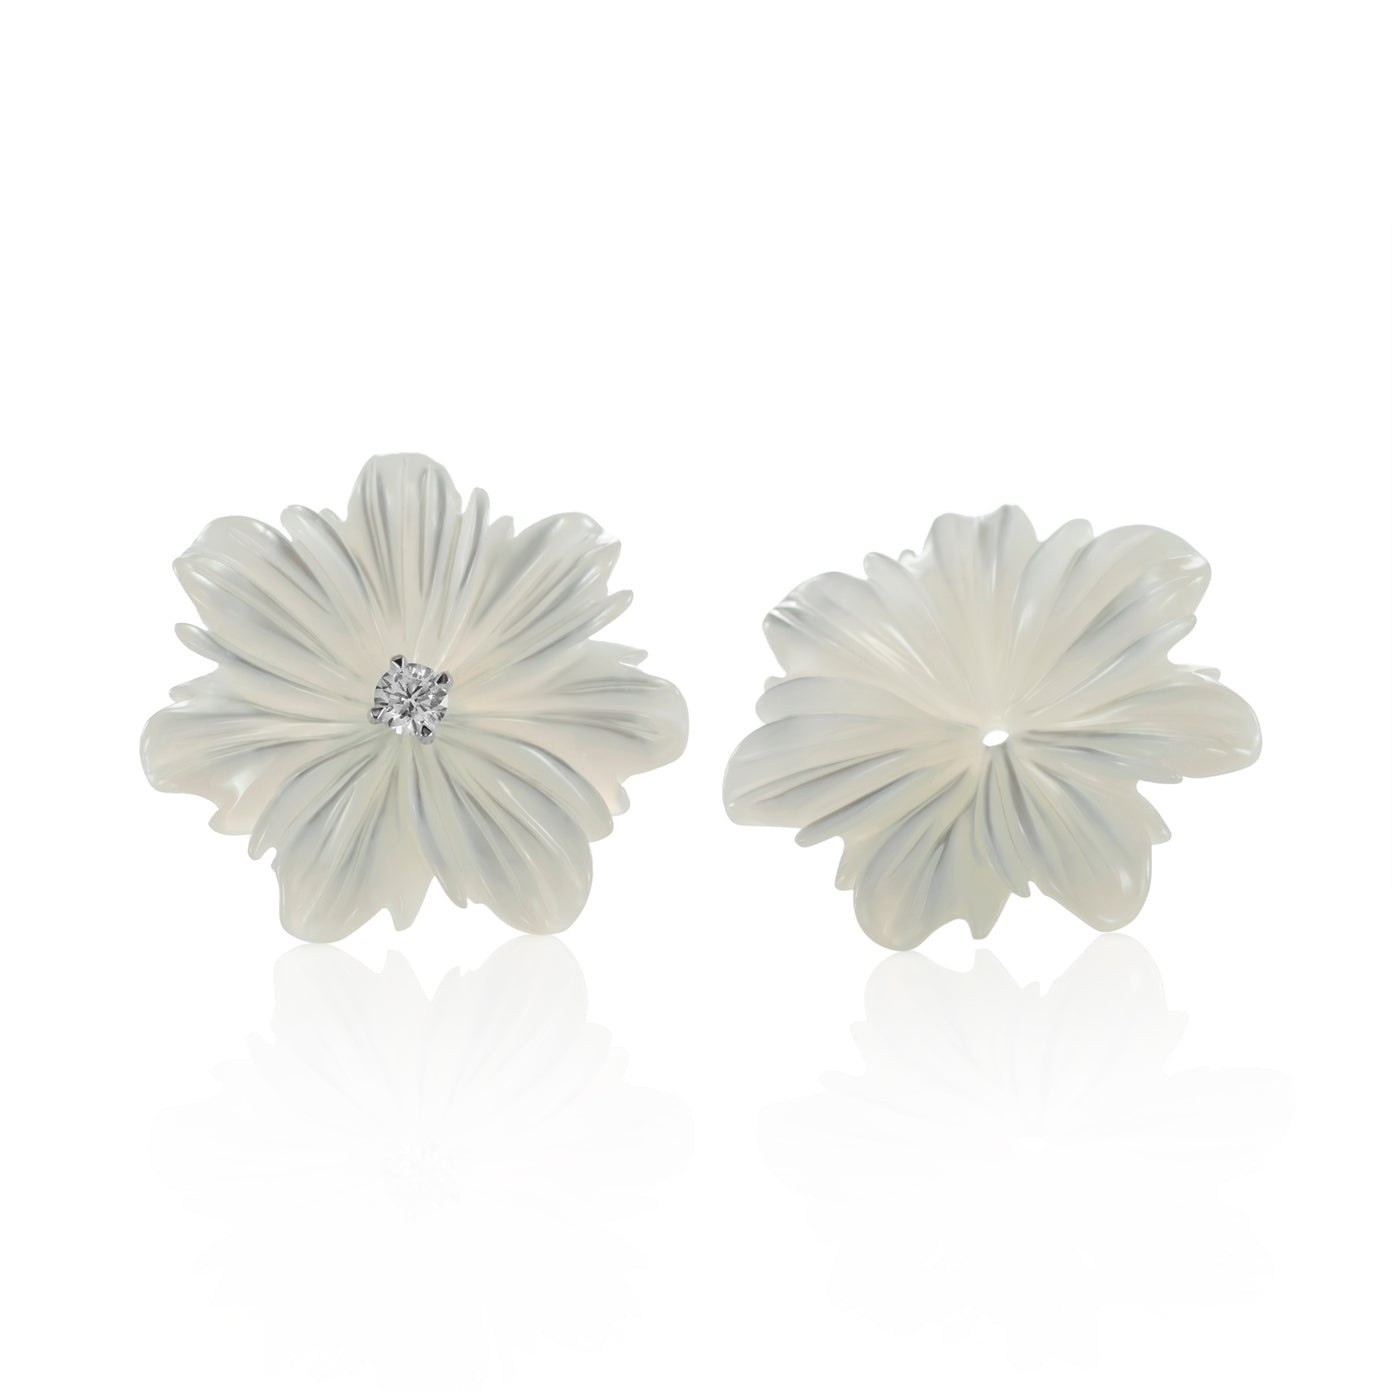 Precious flowers * Mother of pearl Multi-leaf 20 mm